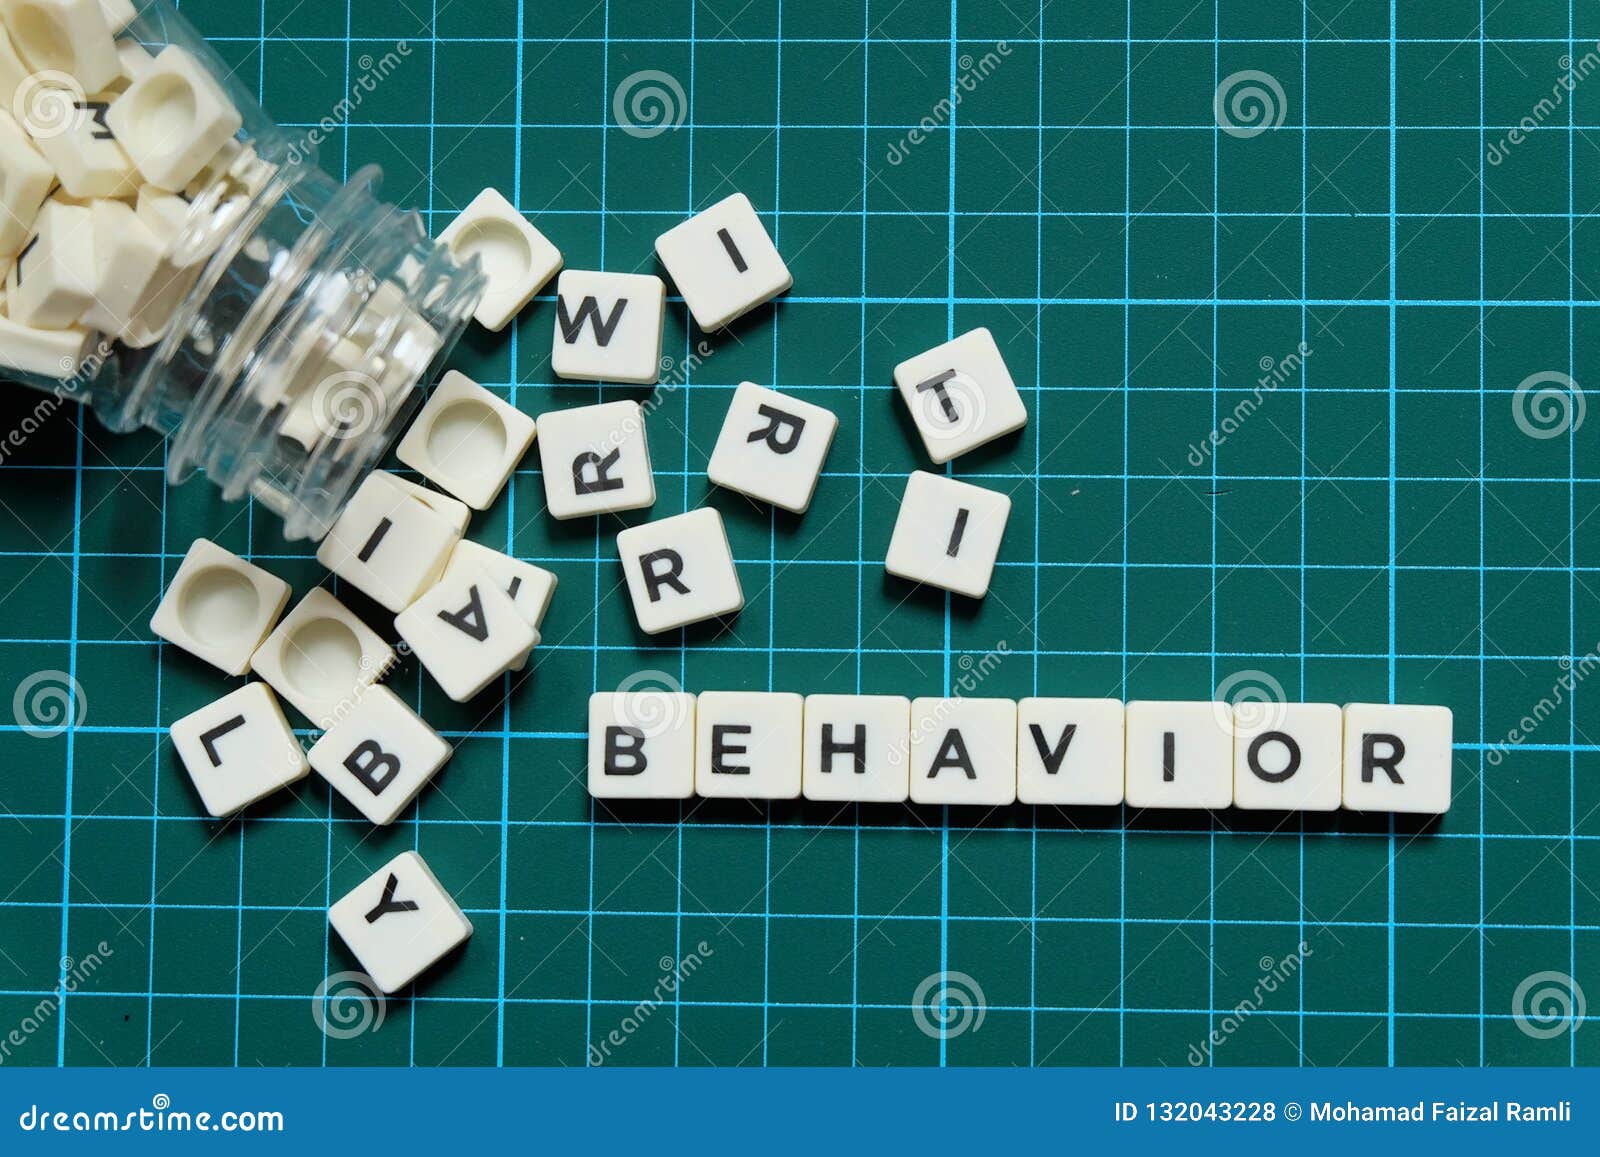 behavior word made of square letter word on green square mat background.